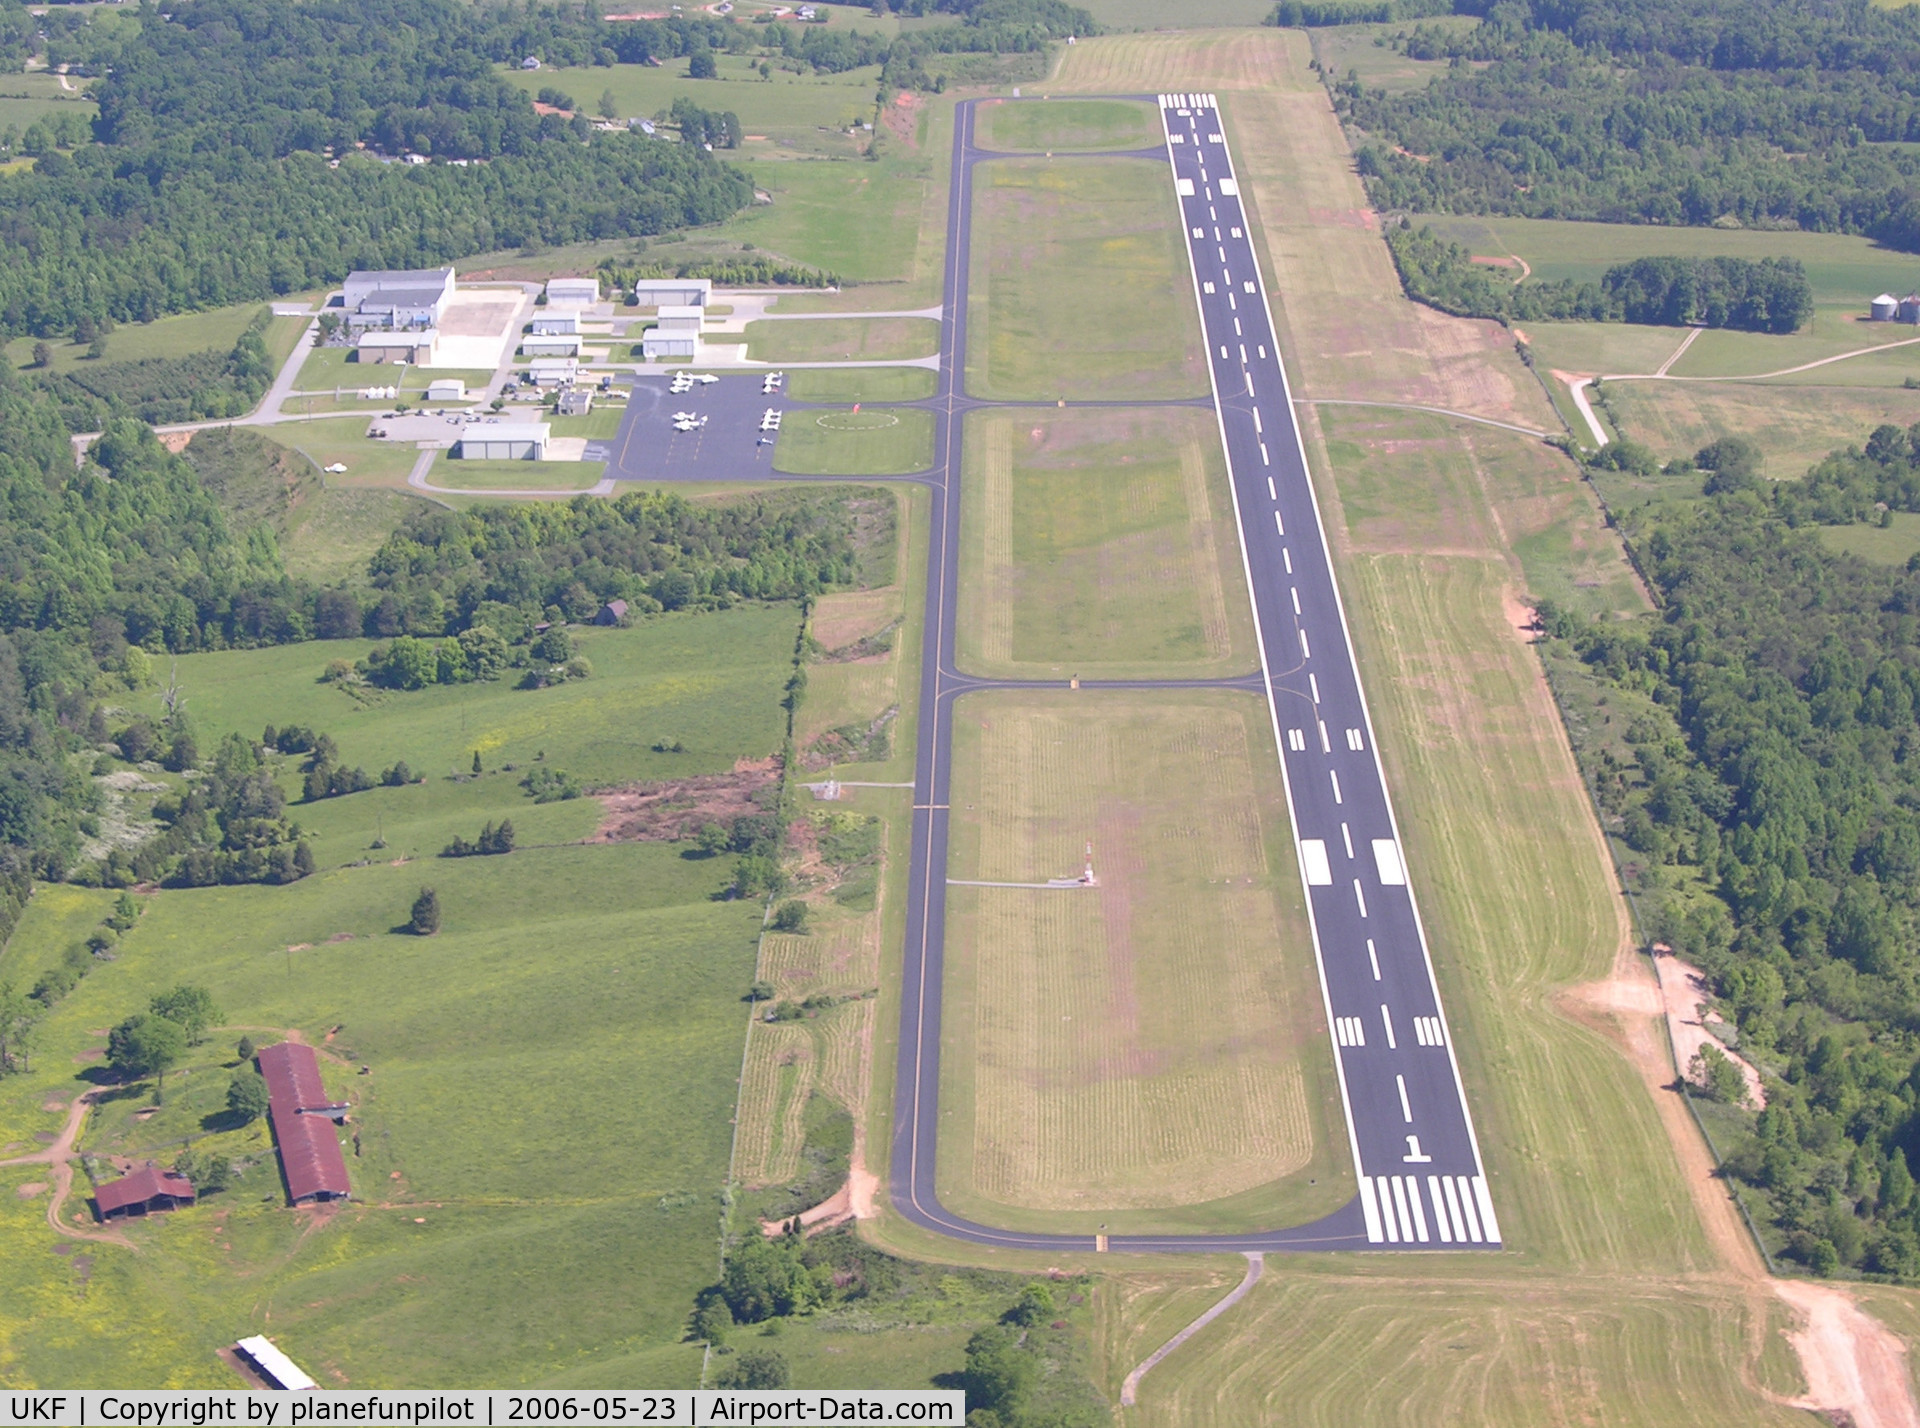 Wilkes County Airport (UKF) - Aerial view of UKF looking from south